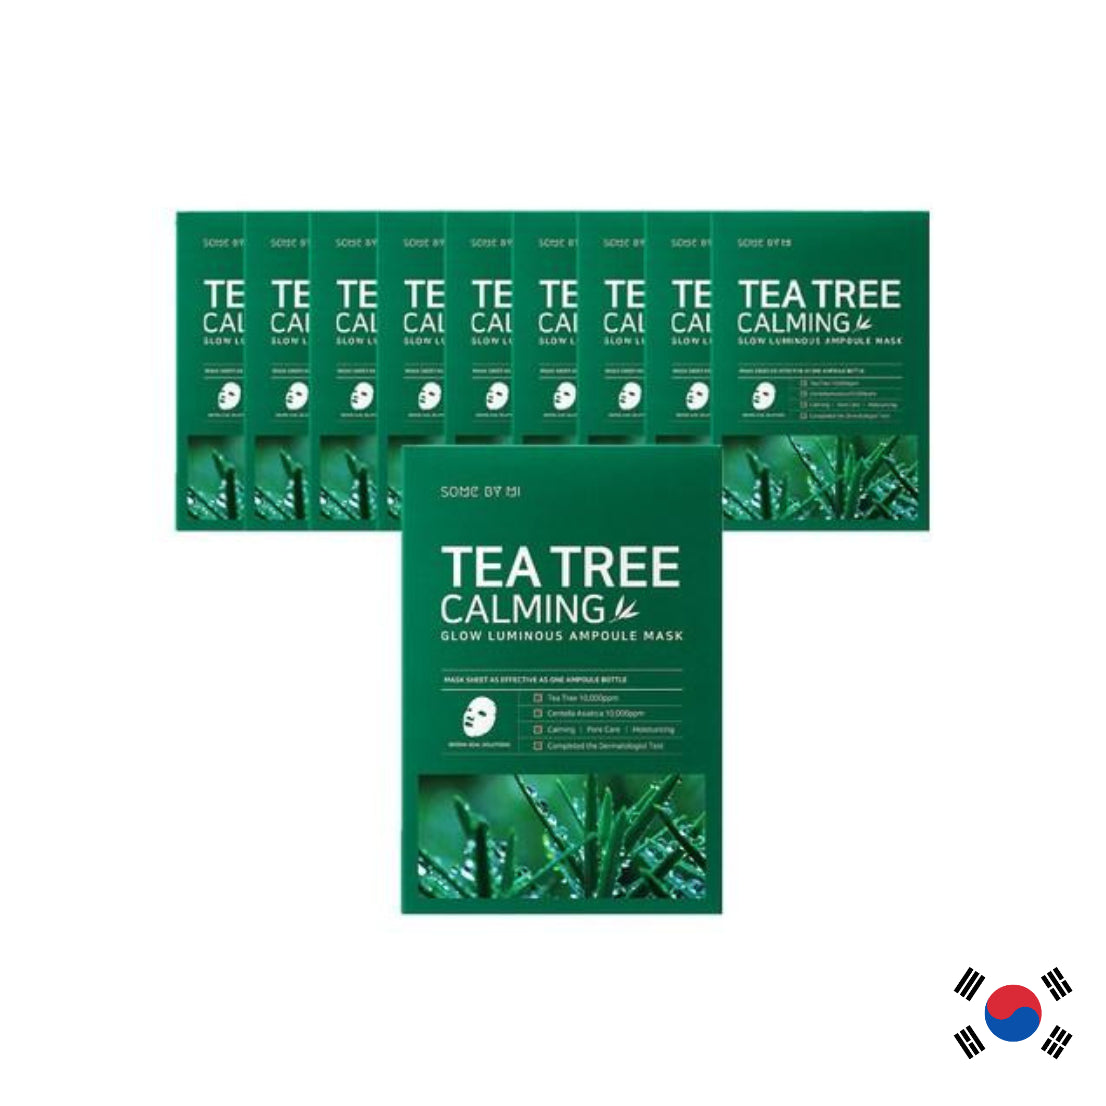 Tea Tree Calming Ampoule Mask x 10 | Some By Mi